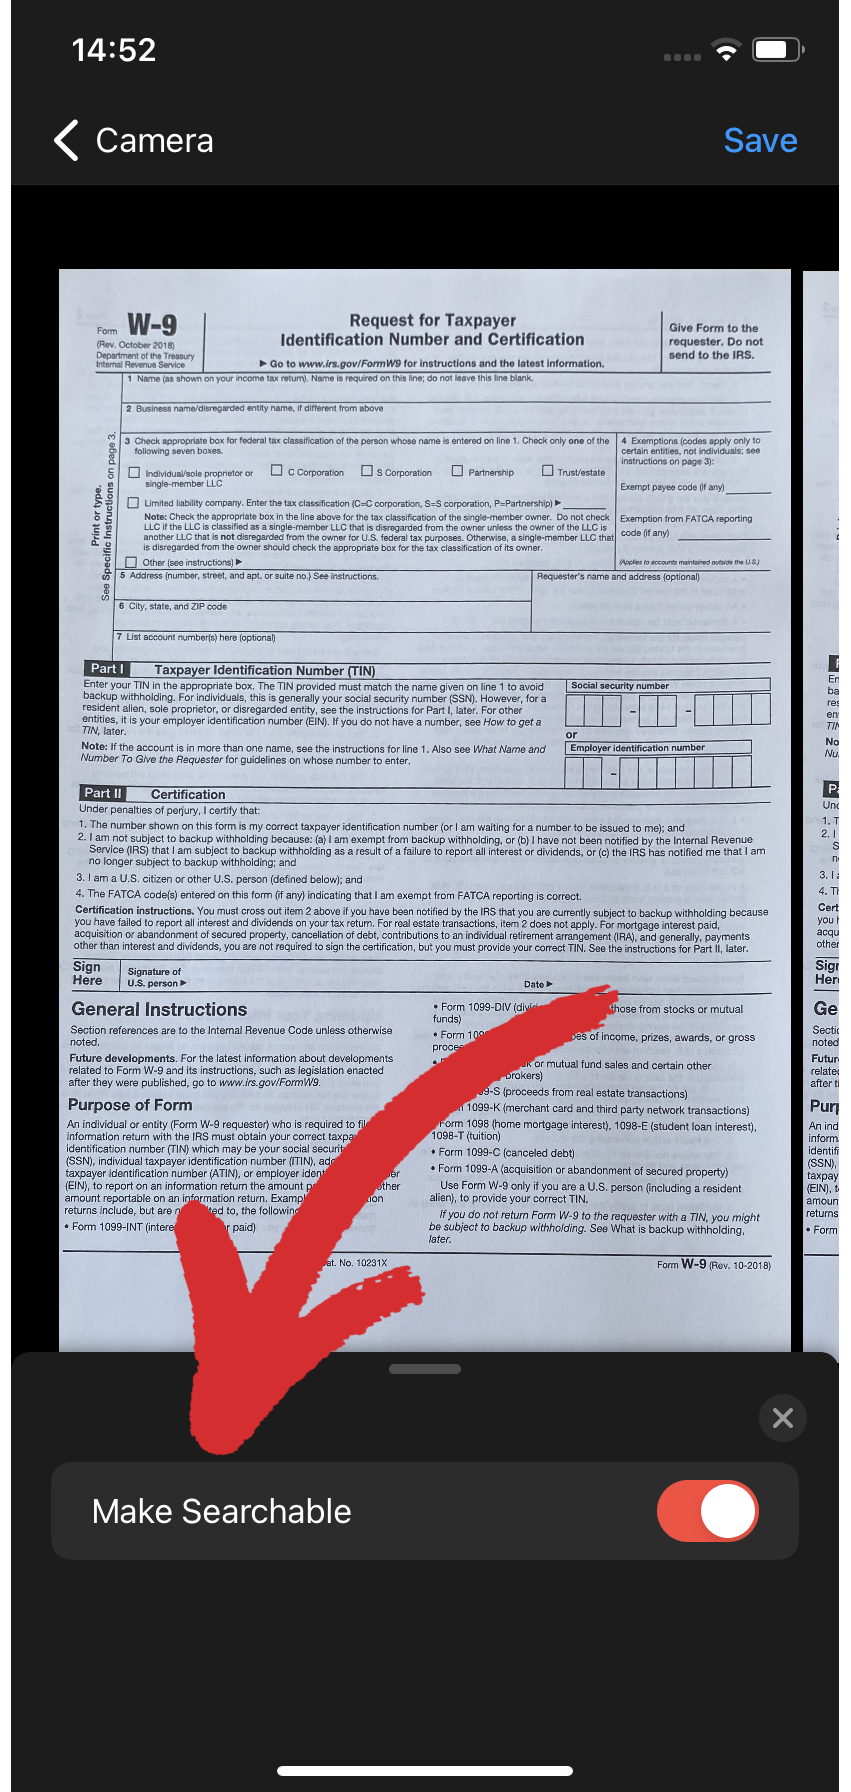 PDF Extra iOS: making document searchable